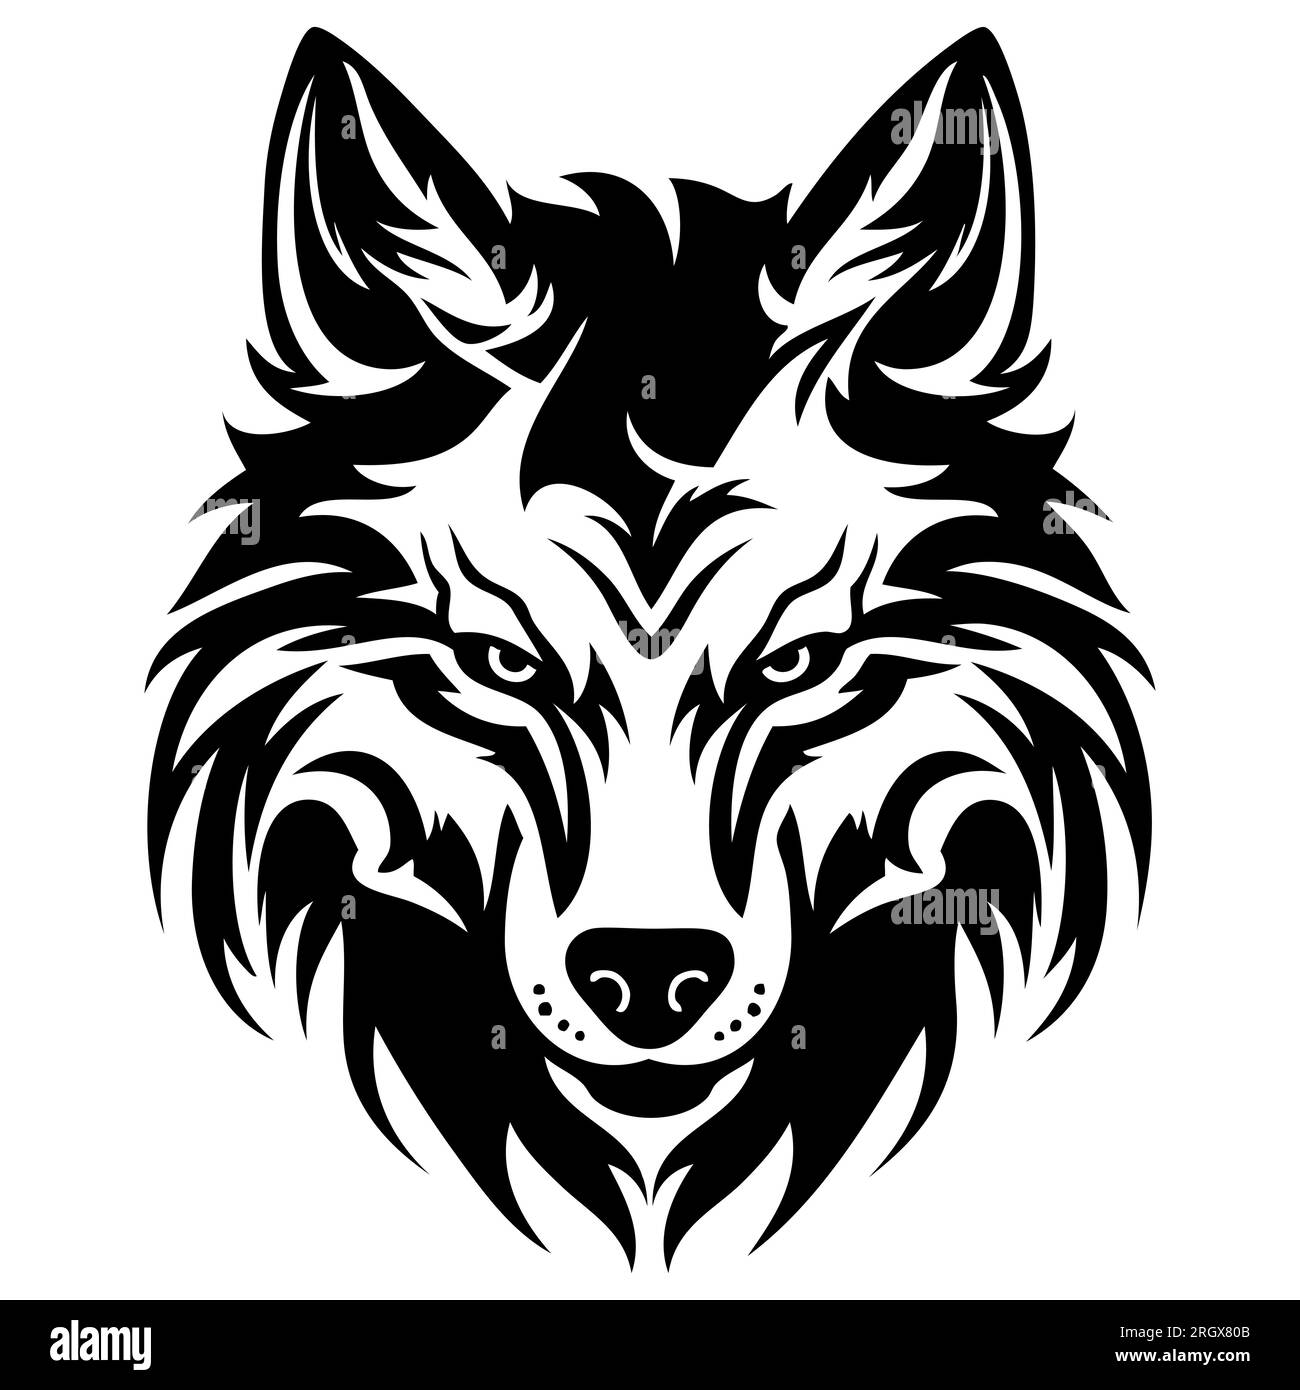 Wolf Flaming Stock Illustrations – 121 Wolf Flaming Stock Illustrations,  Vectors & Clipart - Dreamstime